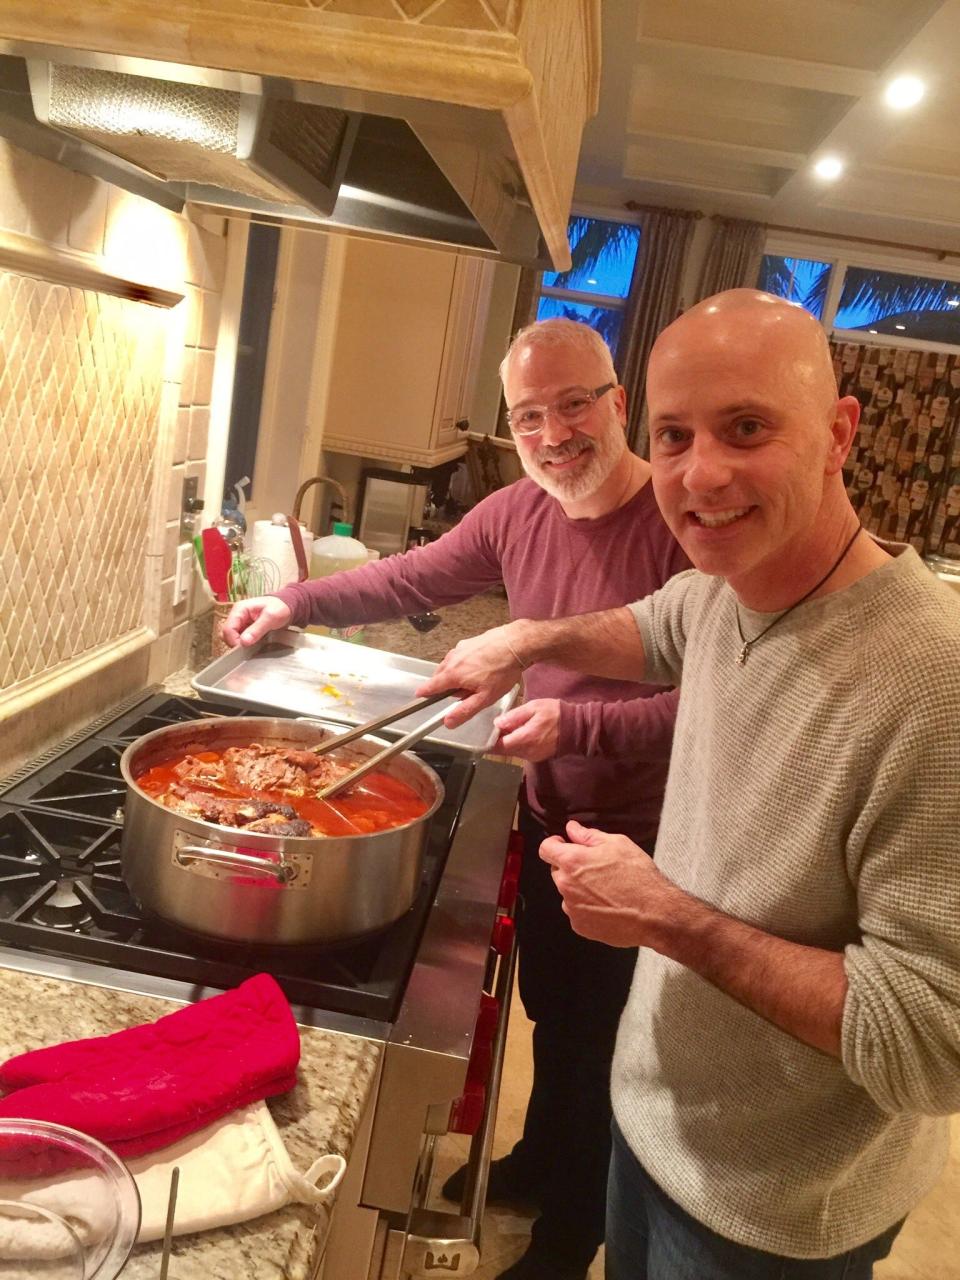 In 2016, Olympic gold medalist and Food Network host Brian Boitano (with partner Franc D'Ambrosio) cooked at the Cobbs home during the Naples Winter Wine Festival.